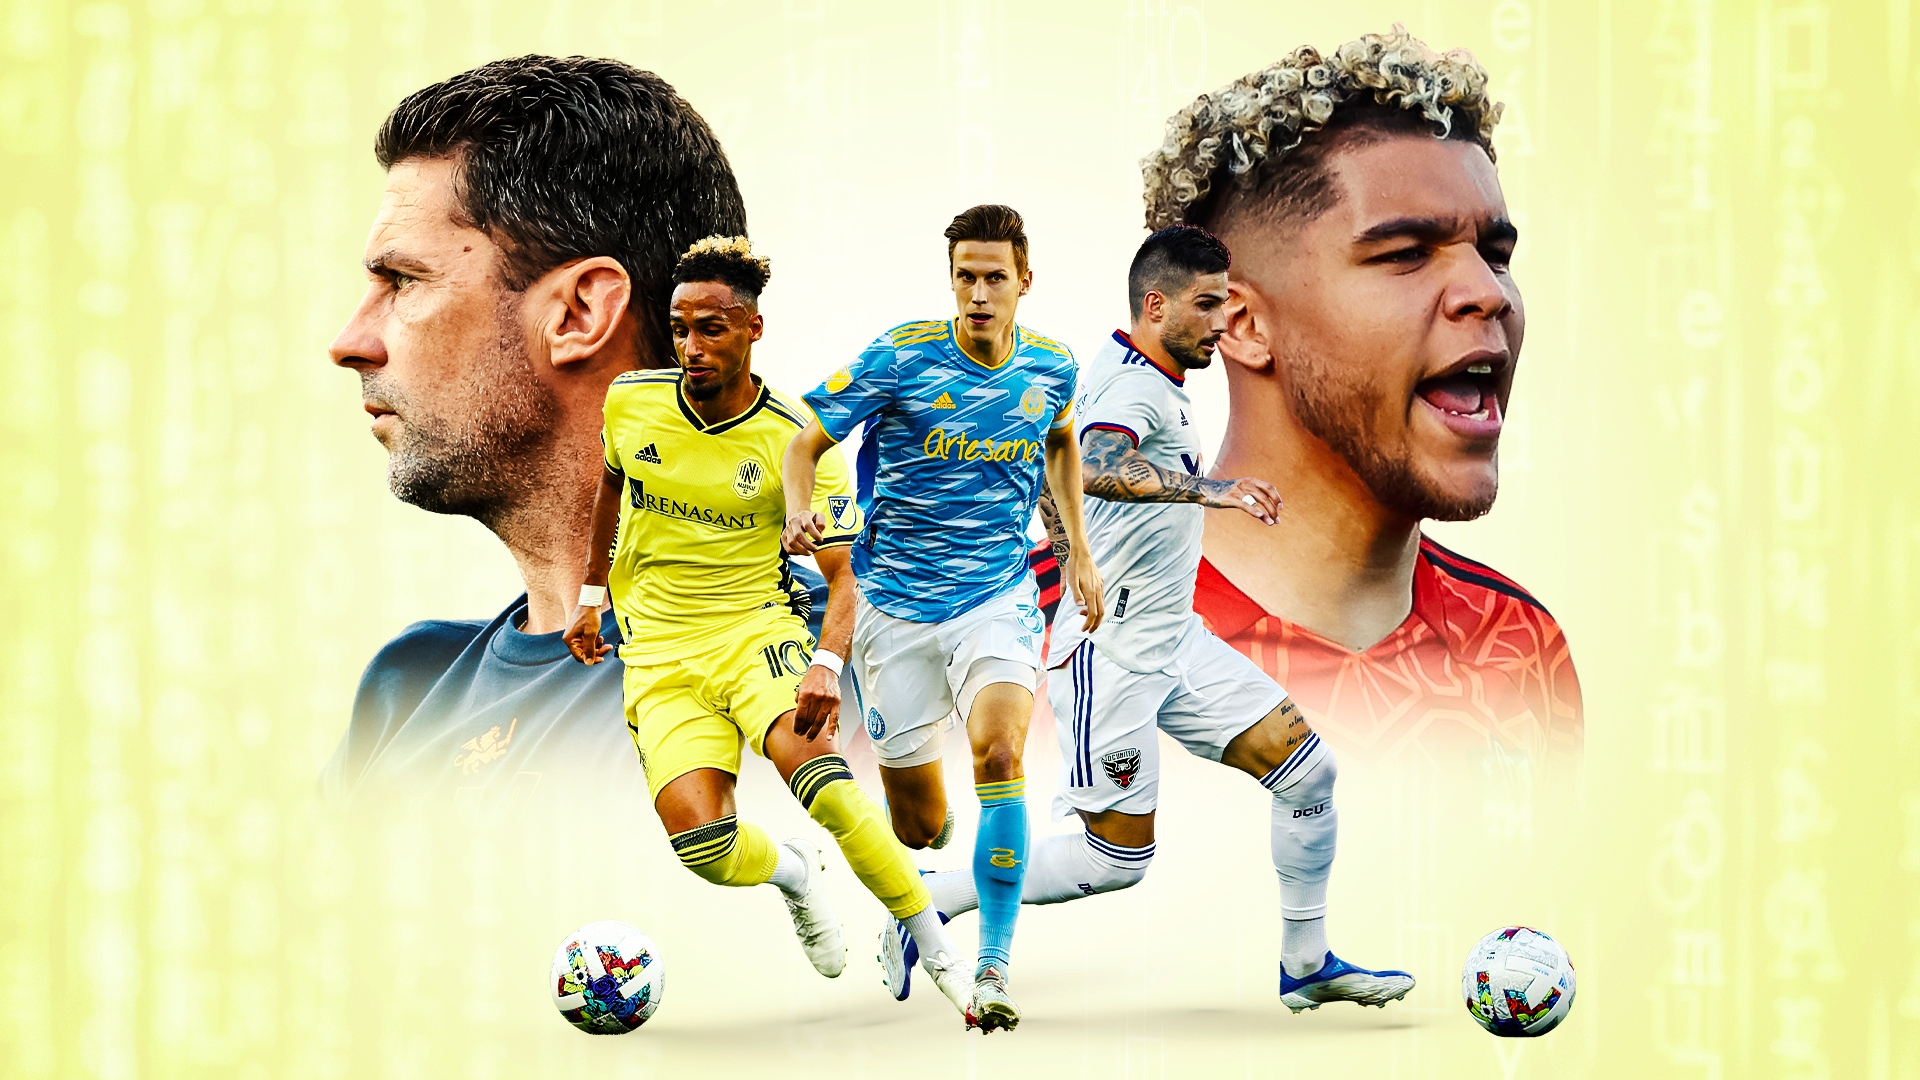 MLS midseason awards: 2022's best players and coaches based on the numbers